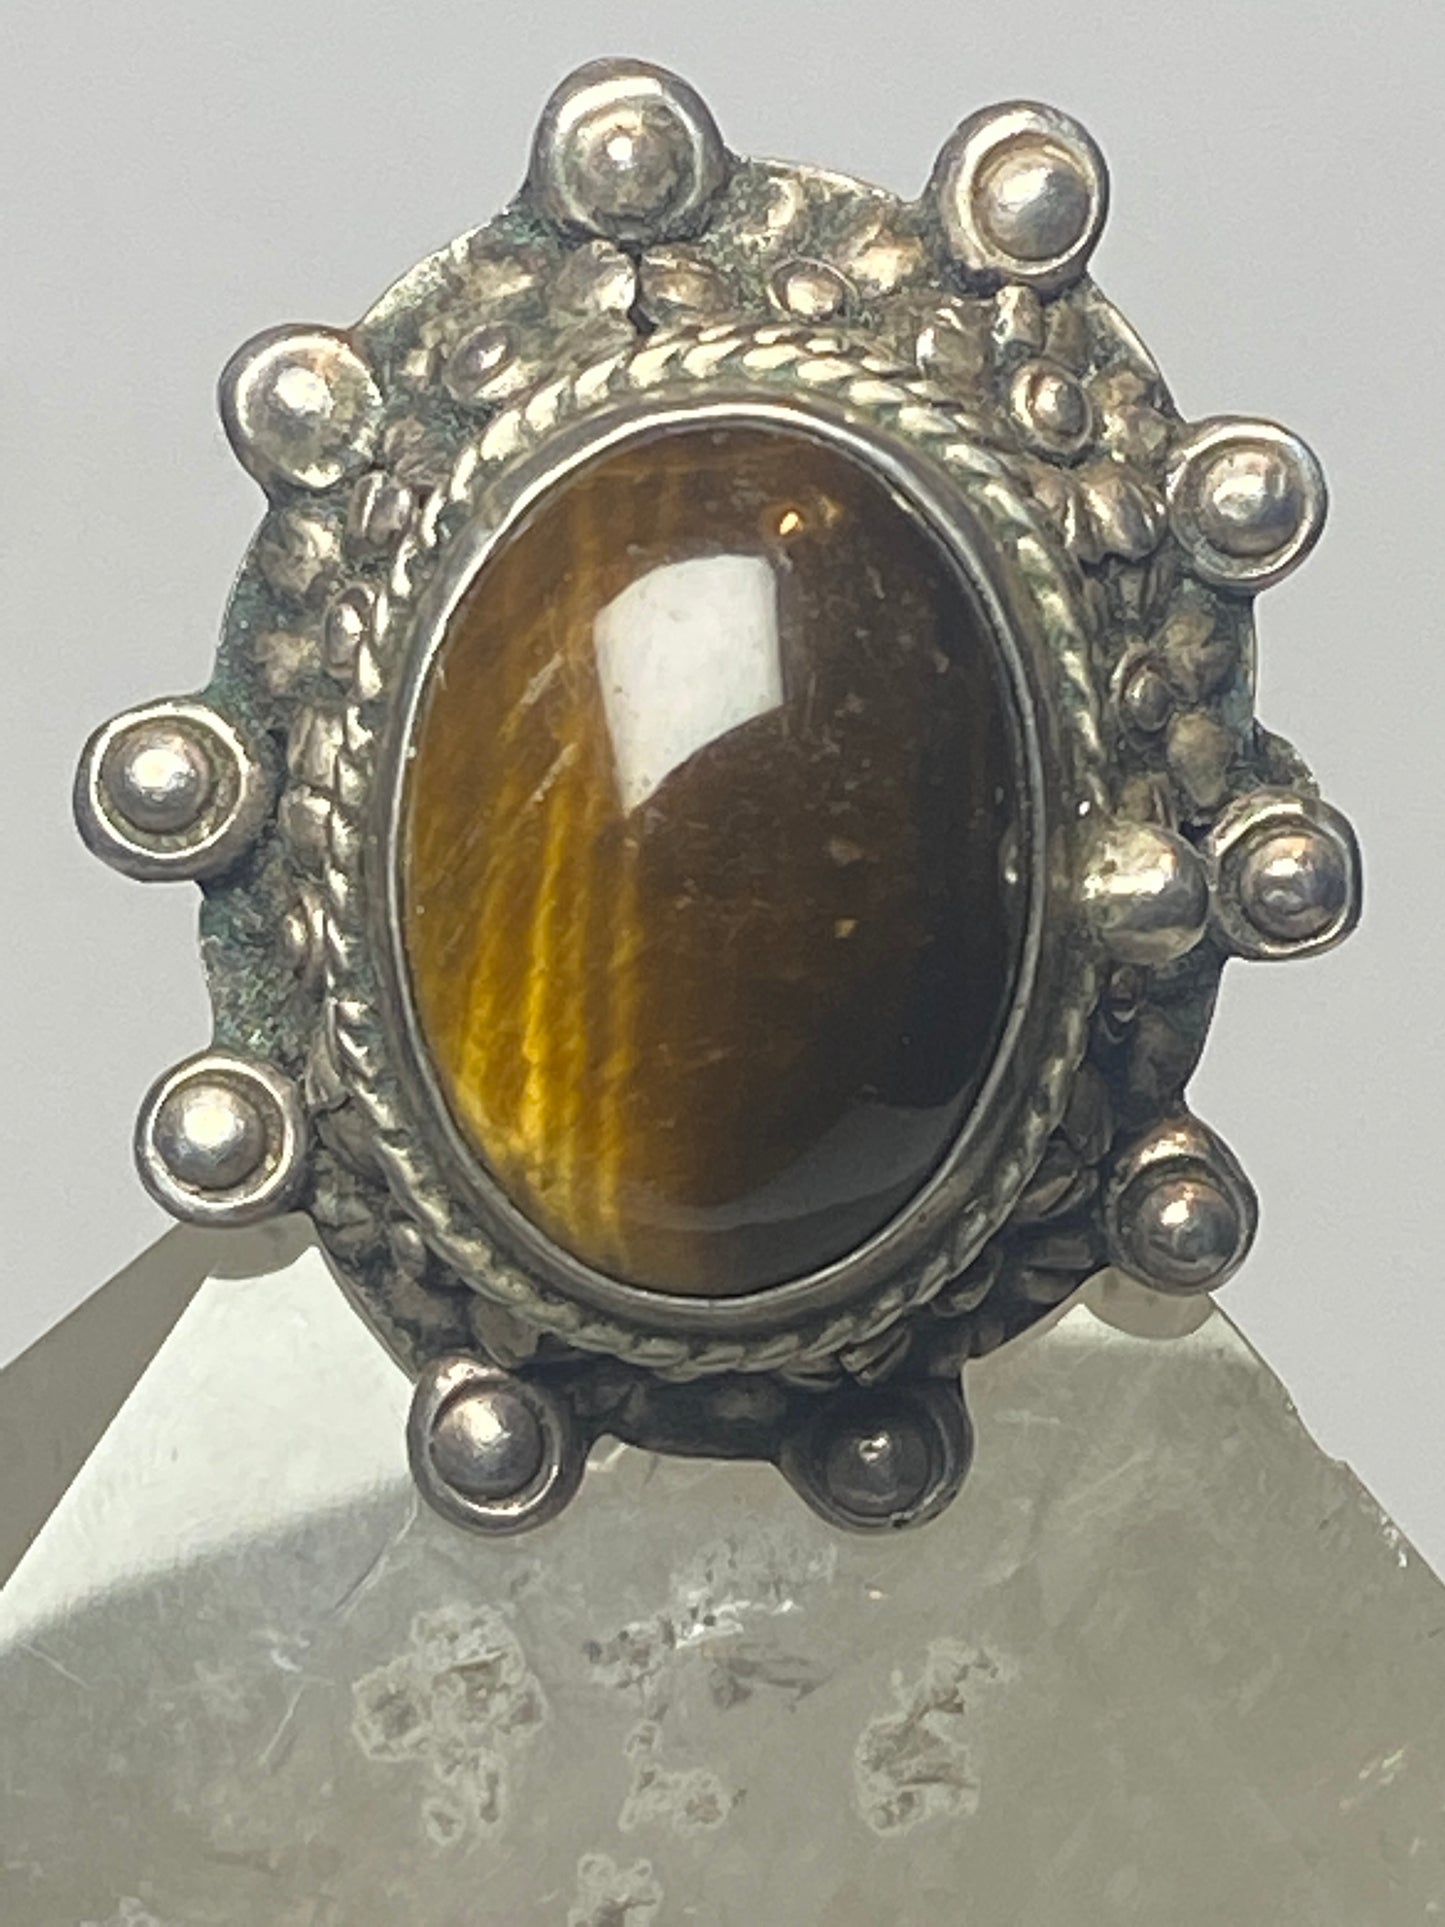 Poison ring Tiger Eye Mexico Mexican  southwest sterling silver women girls